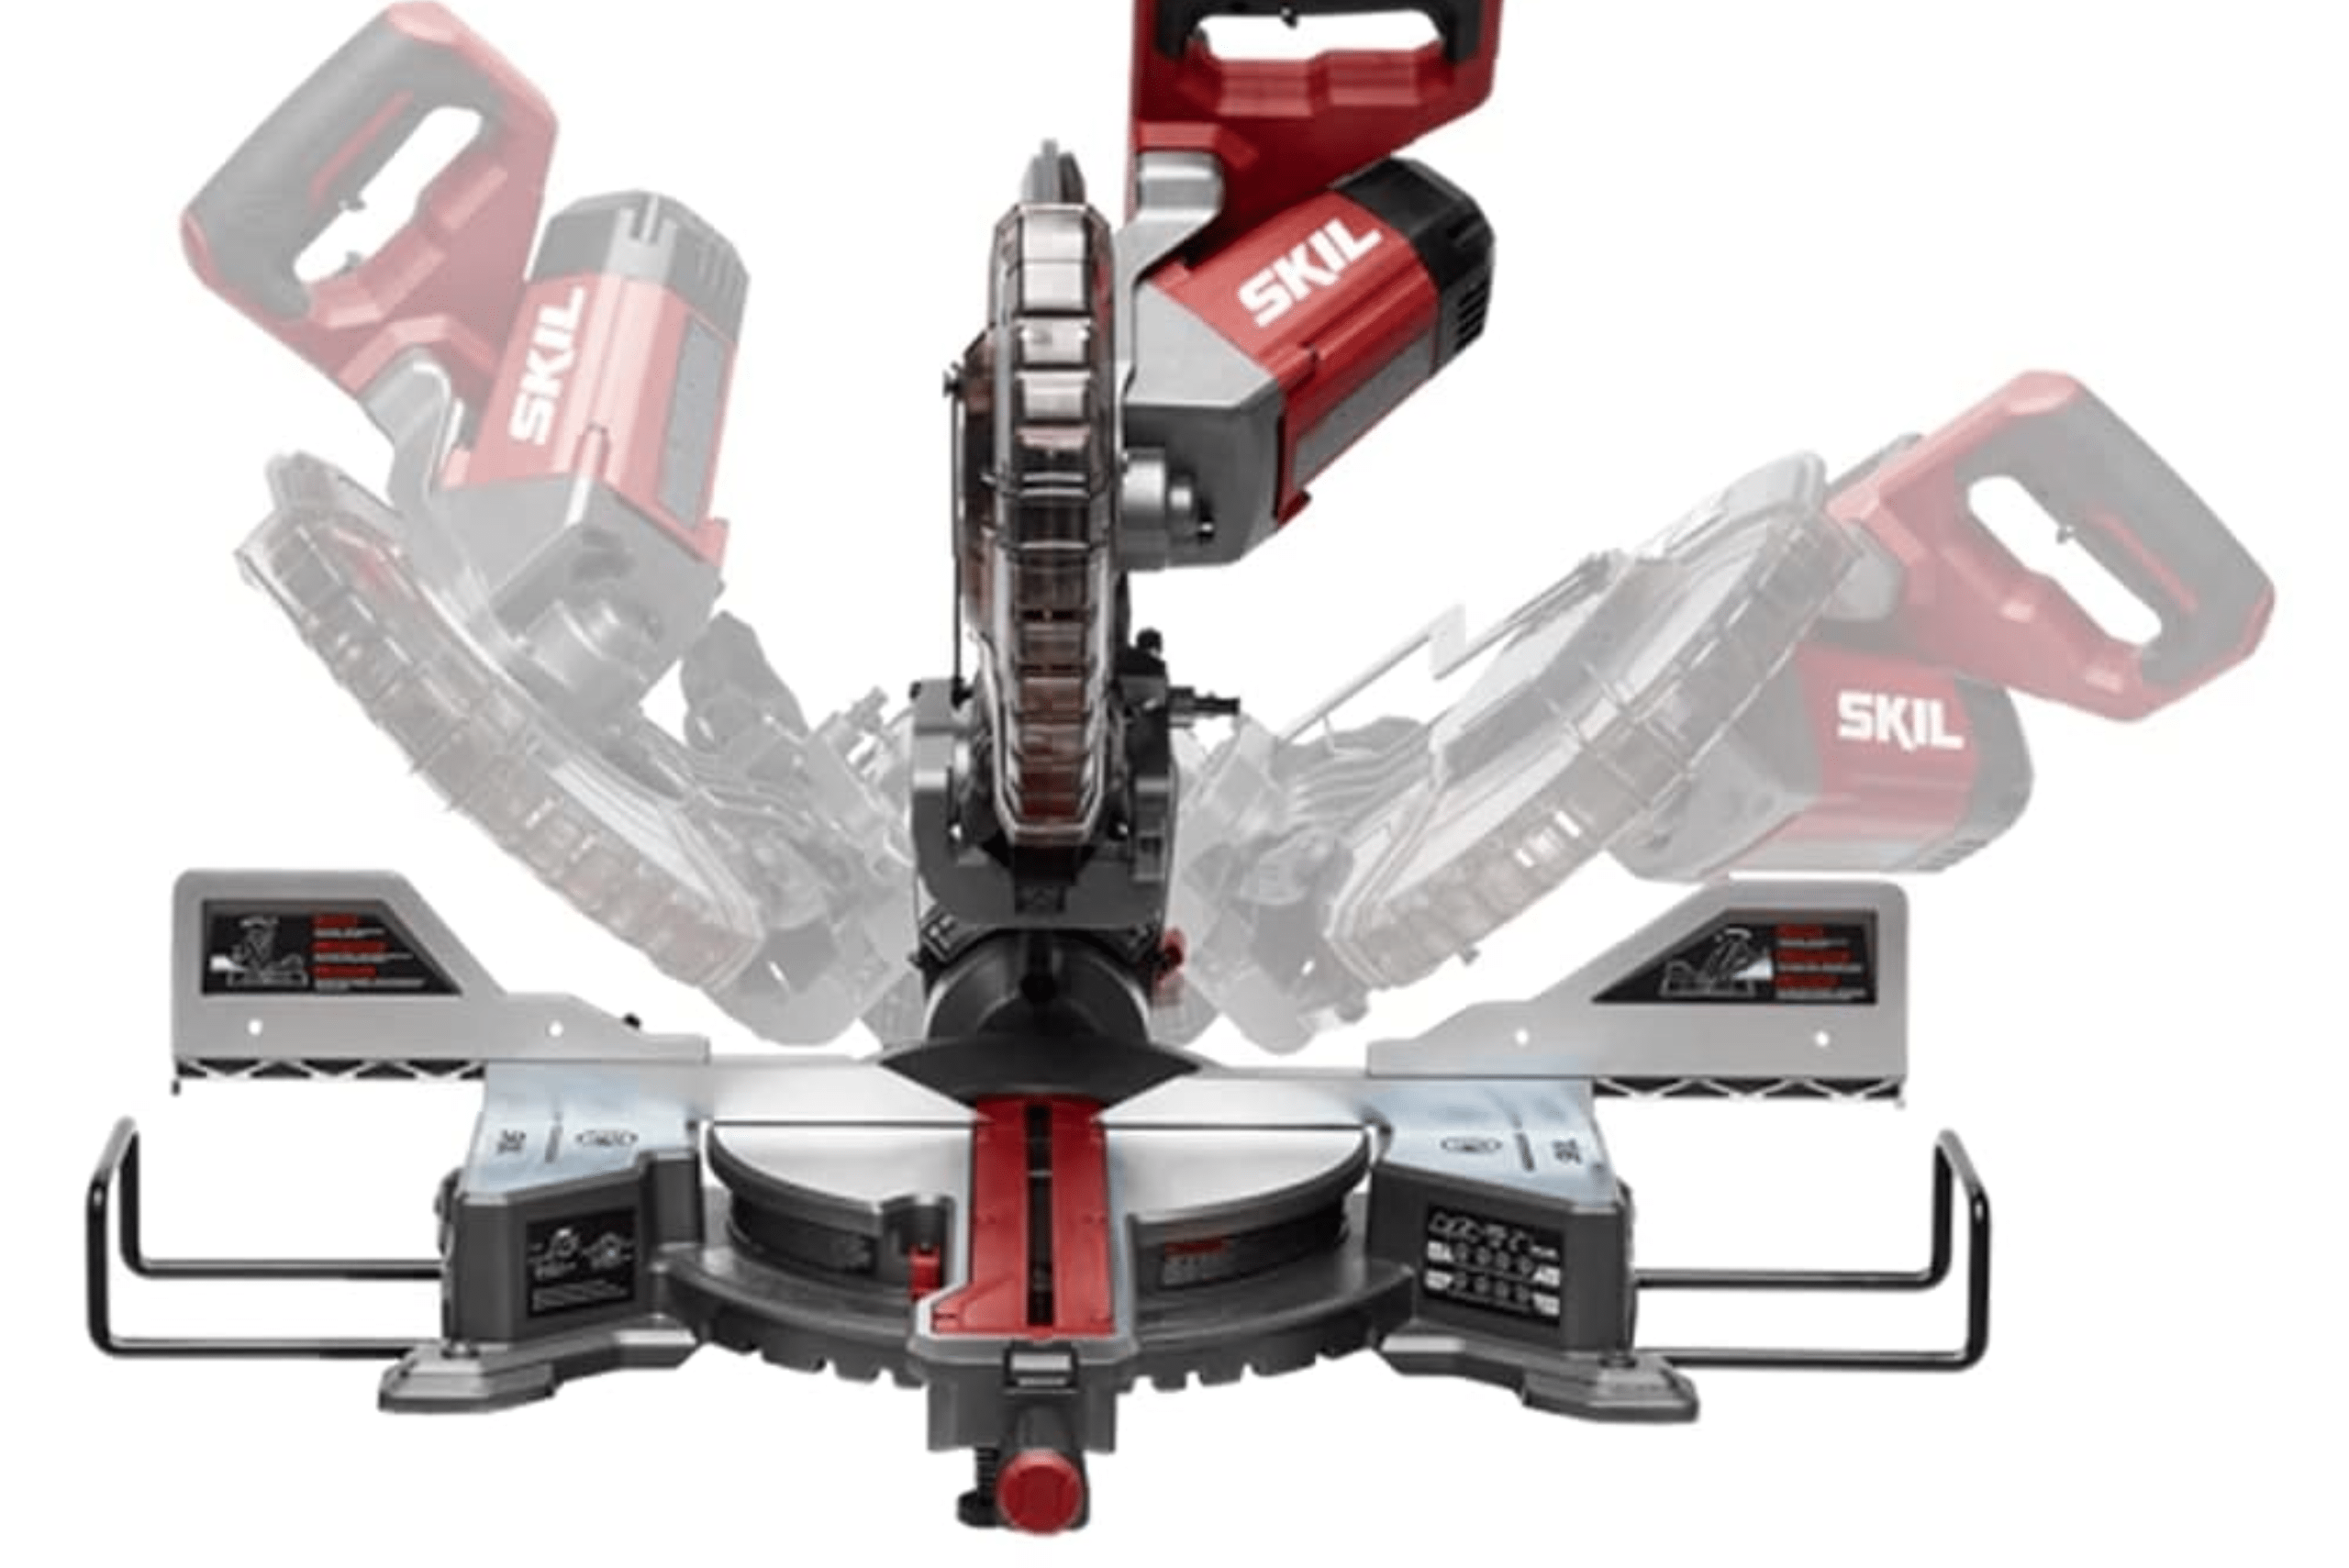 Product image of Skil double-bevel miter saw.